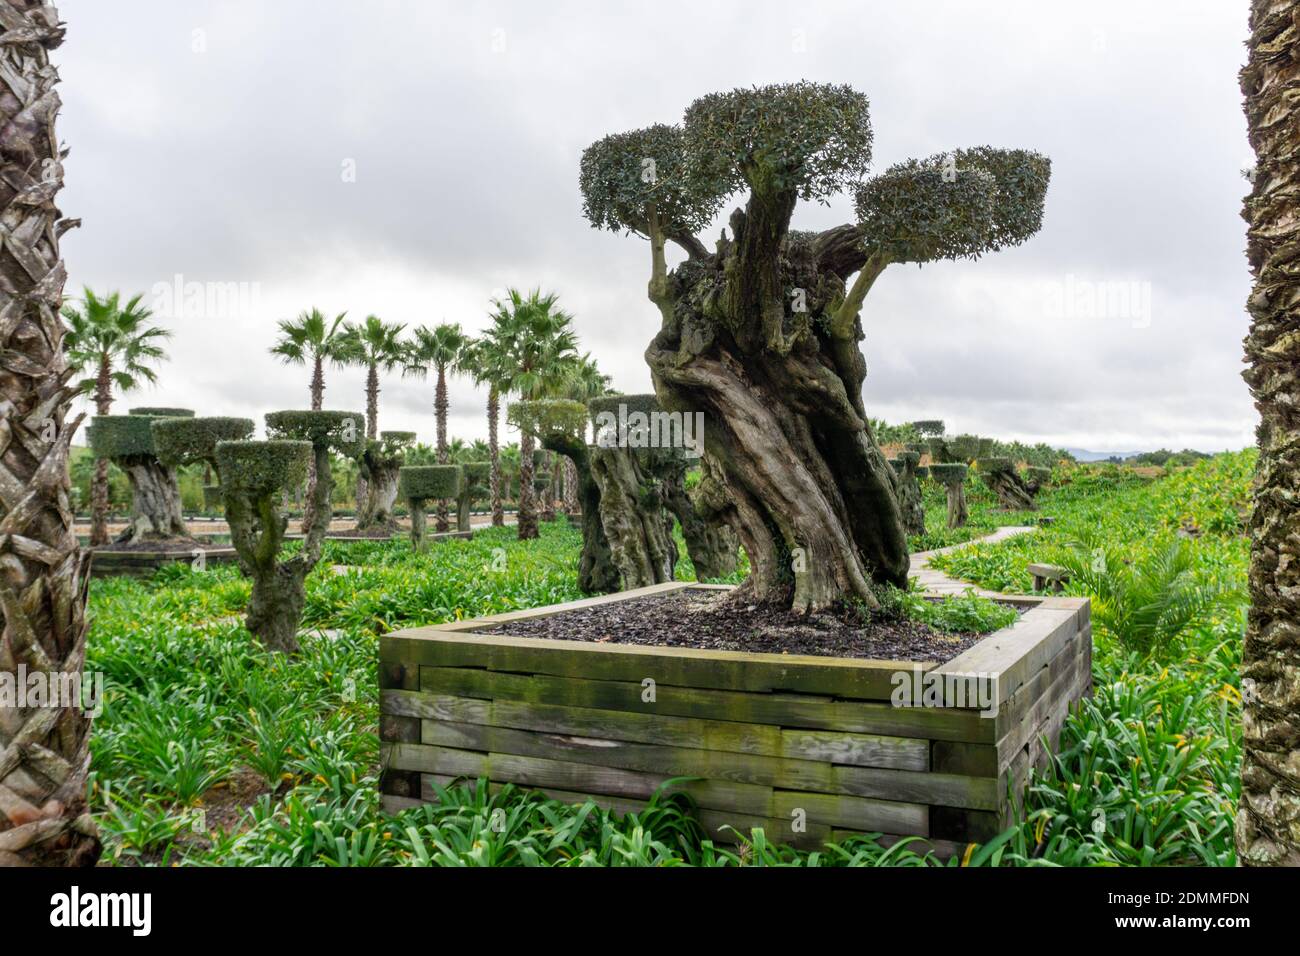 Carvalhal Bombarral, Portugal - 13 December 2020: large Bonsai tree in the Buddha Eden Garden in Portugal Stock Photo